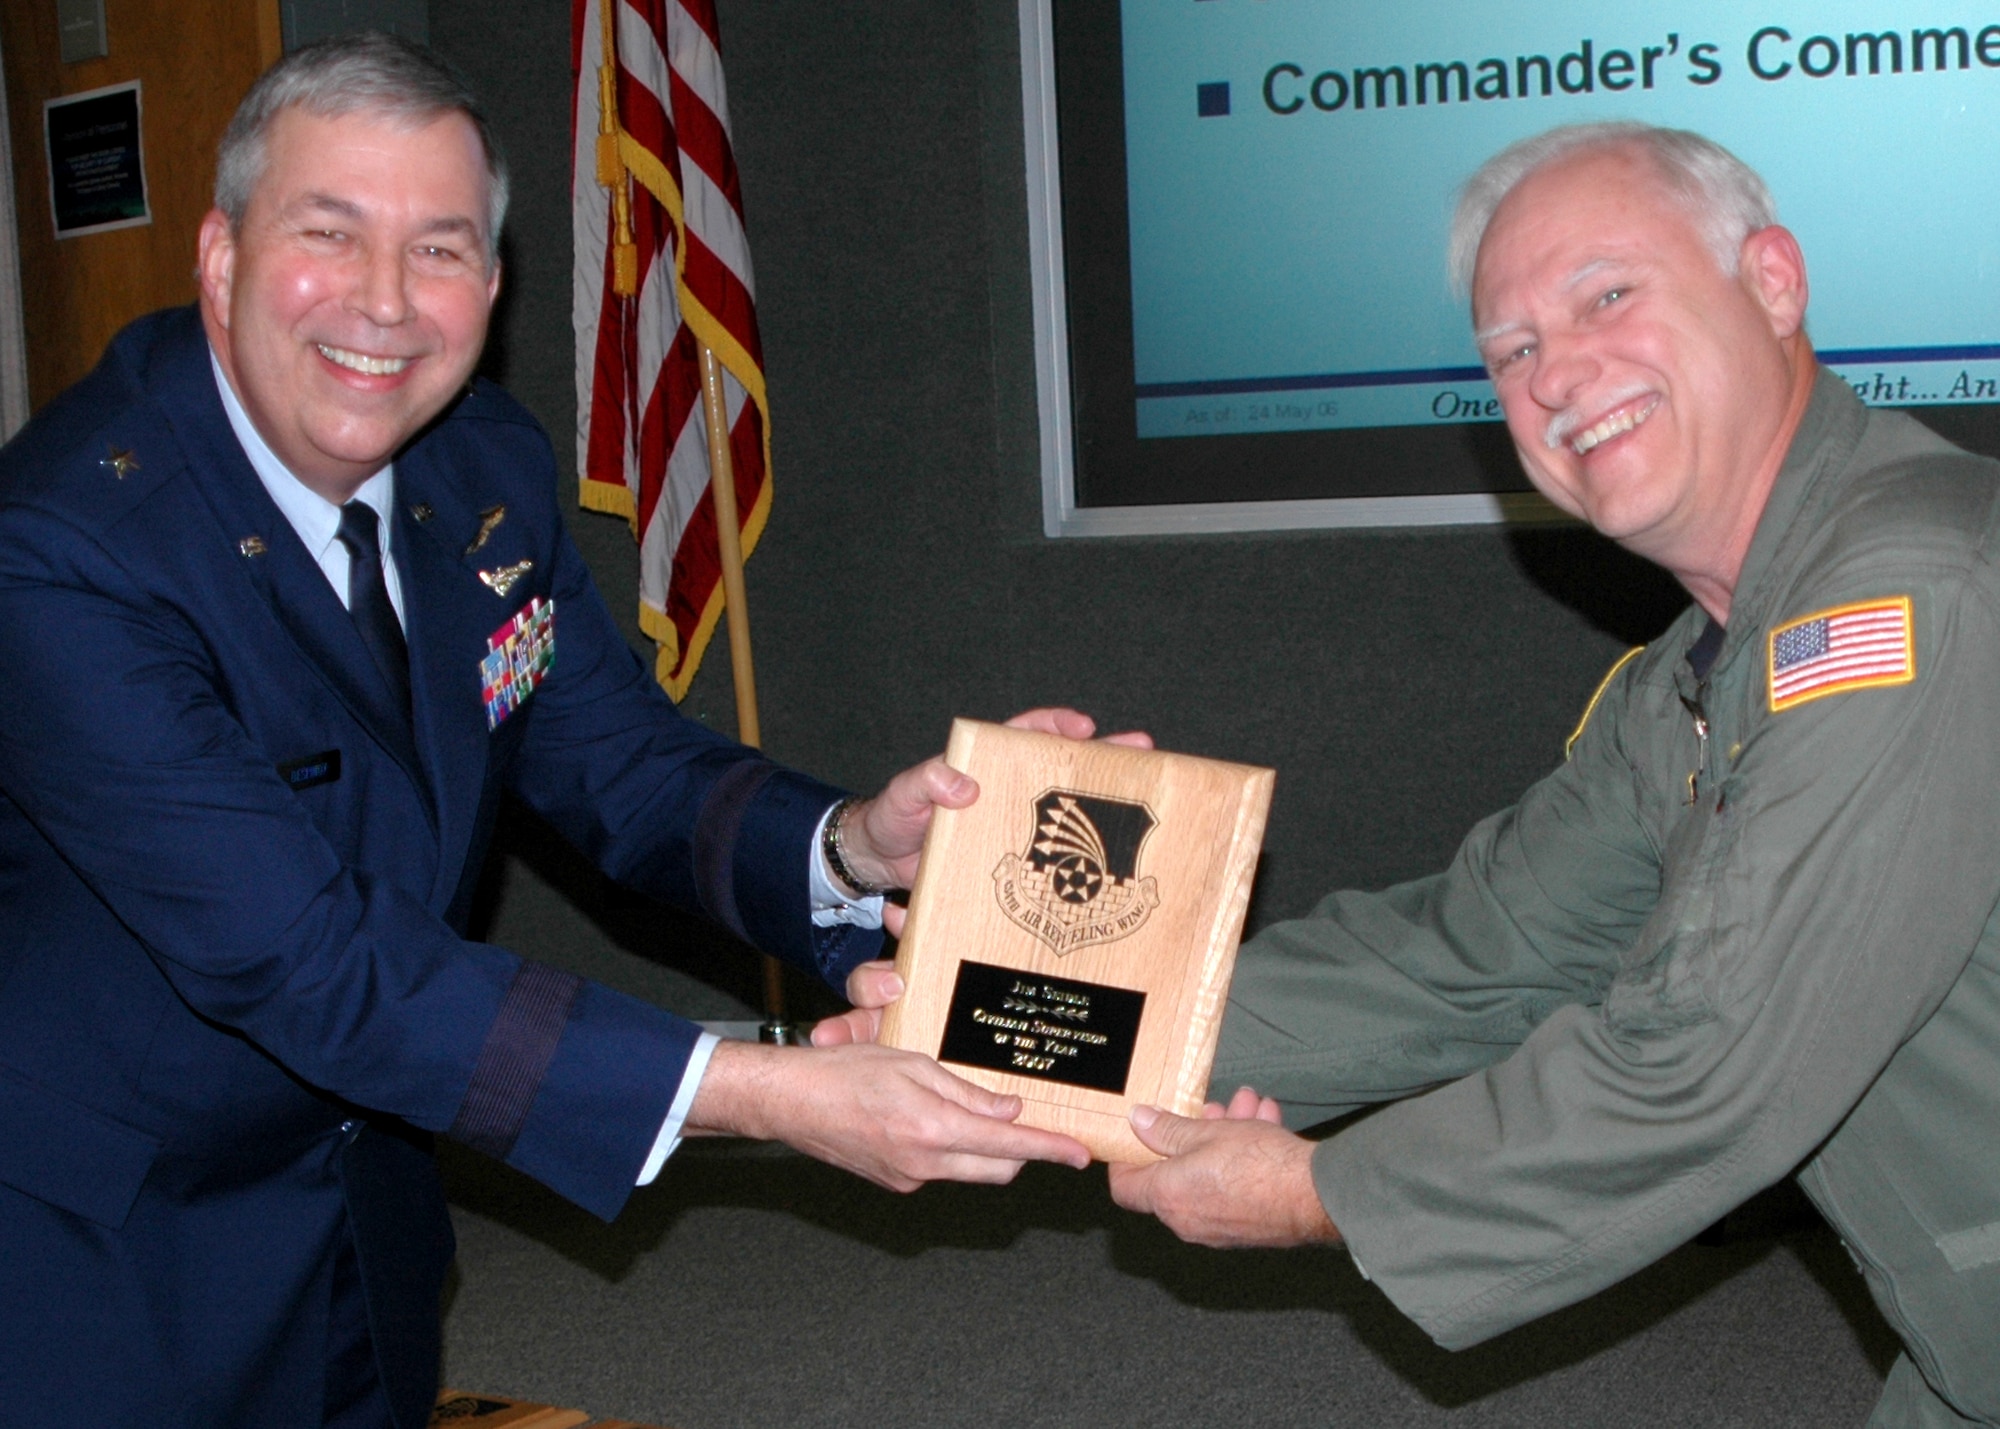 GRISSOM AIR RESERVE BASE, Ind., -- Brig. Gen. Dean Despinoy, 434th Air Refueling Wing commander, left, presents a plaque to Senior Master Sgt. James Seidle, a boom operator with the 72nd Air Refueling Squadron, on his selection as Grissom's Supervisor of the Year. The presentation was made during a recent civilian commander's call. (U.S. Air Force photo/Tech. Sgt. Douglas Hays)